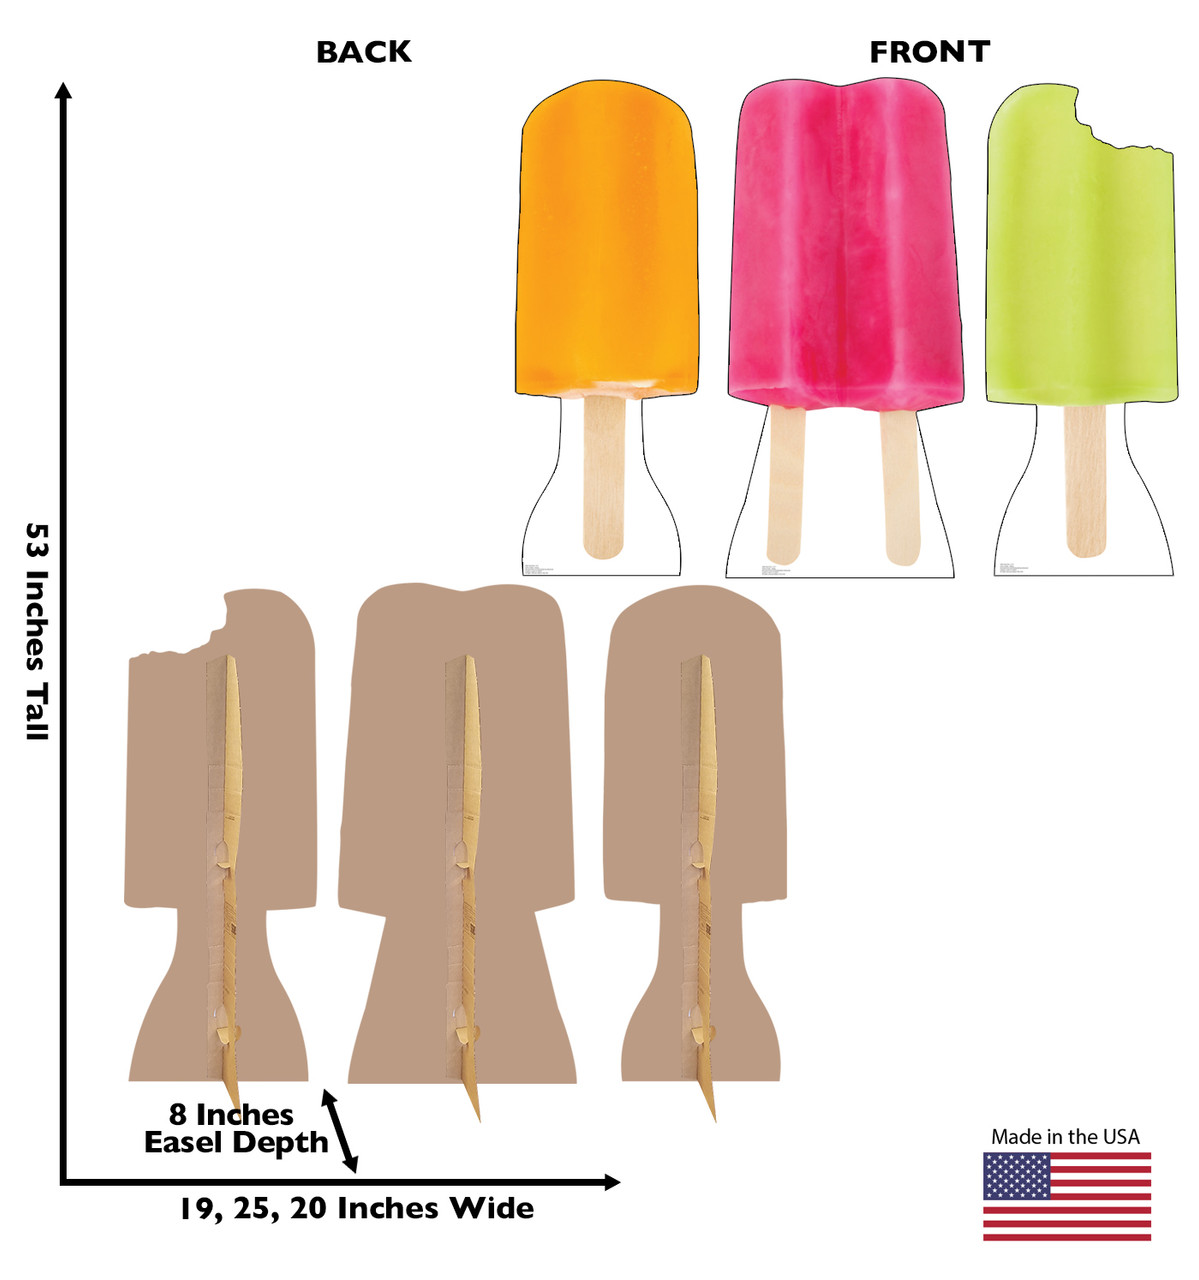 Life-size cardboard standees of Popsicle's (set of 3) with back and front dimensions.